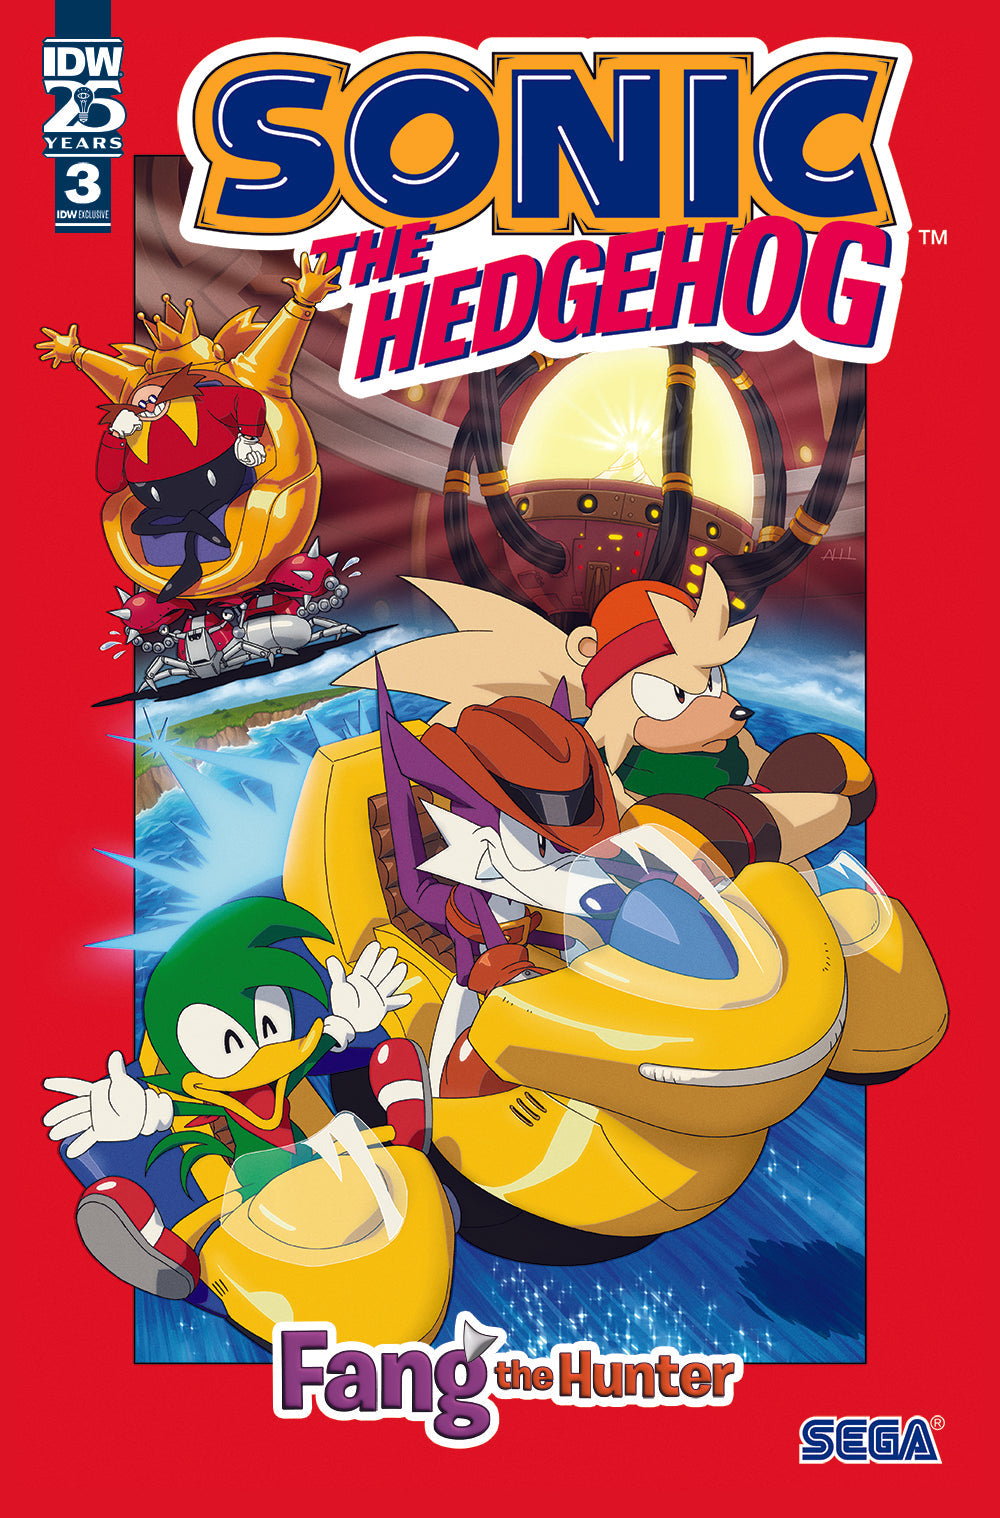 Sonic the Hedgehog: Fang the Hunter #3 - IDW Foil Exclusive